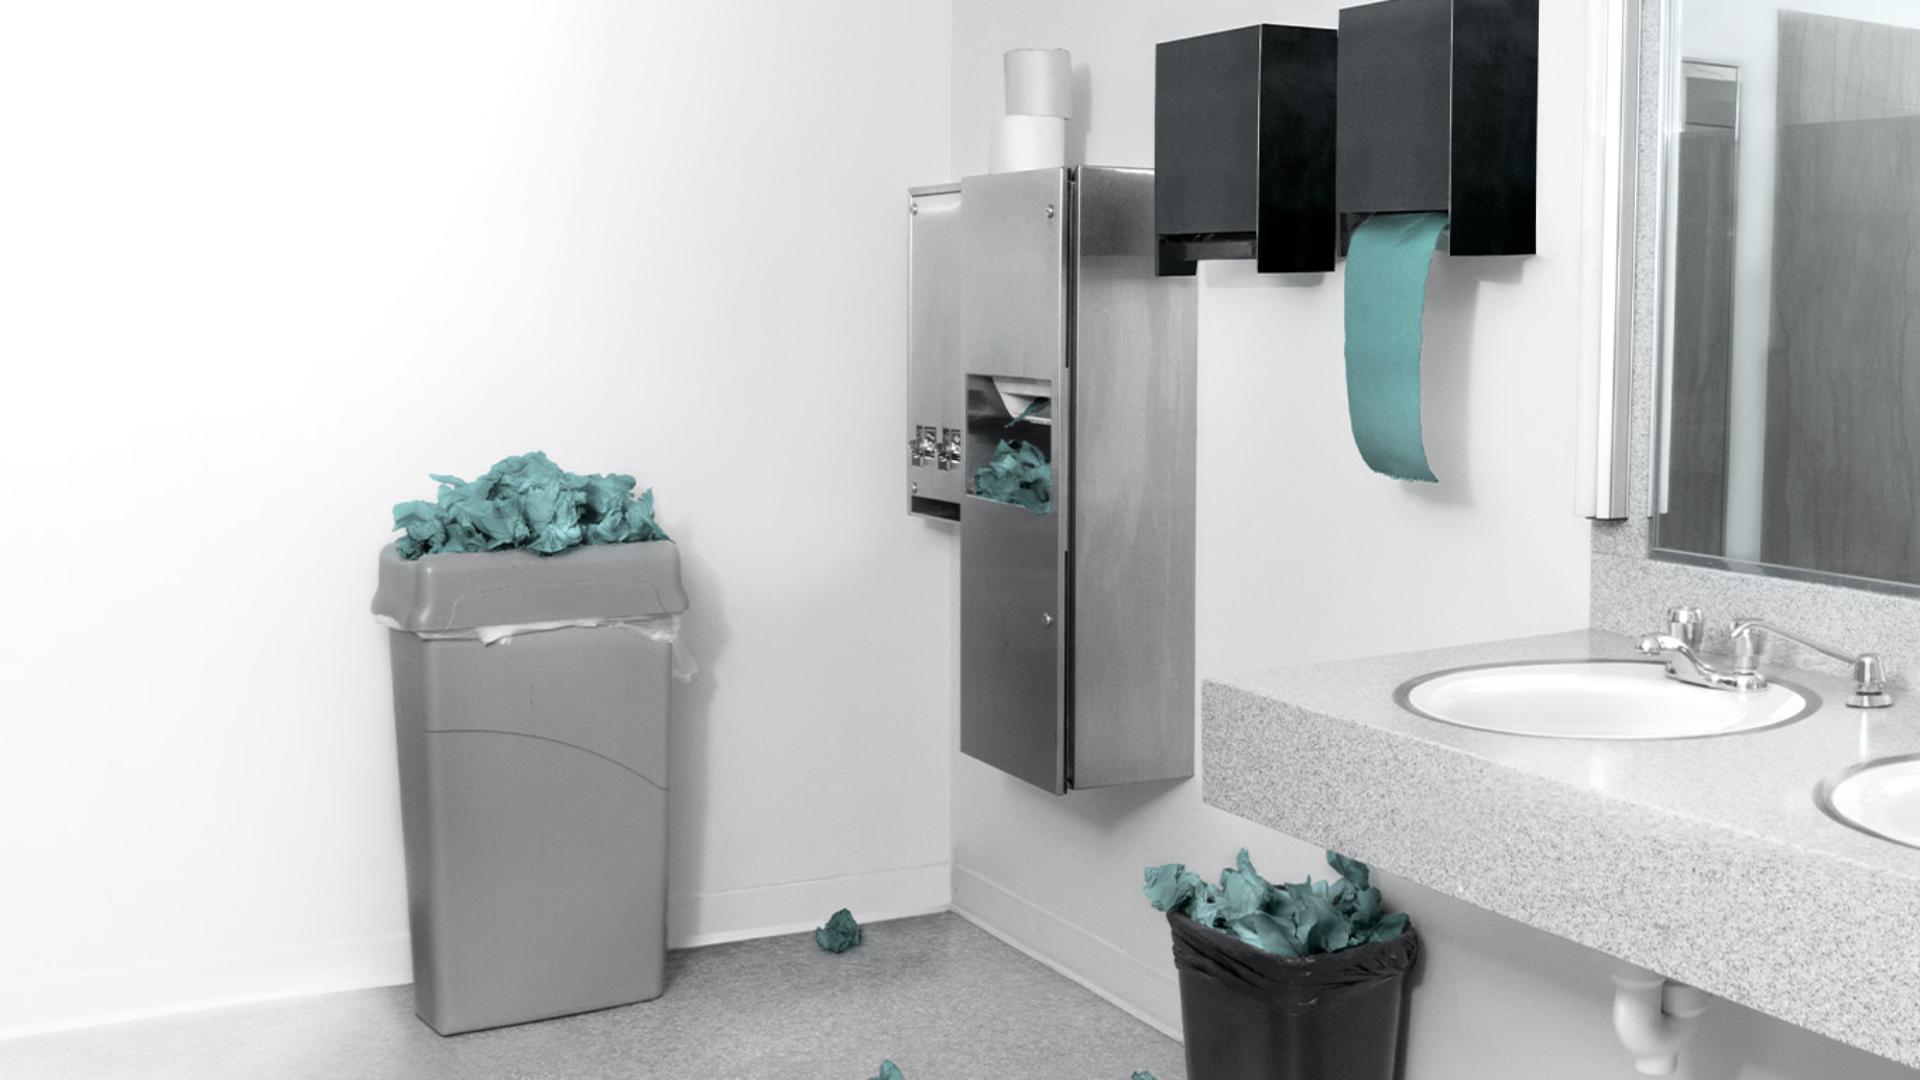 A public bathroom with paper towel dispensers and trash cans overflowing with paper towel waste. Some paper towels are balled up on floor.